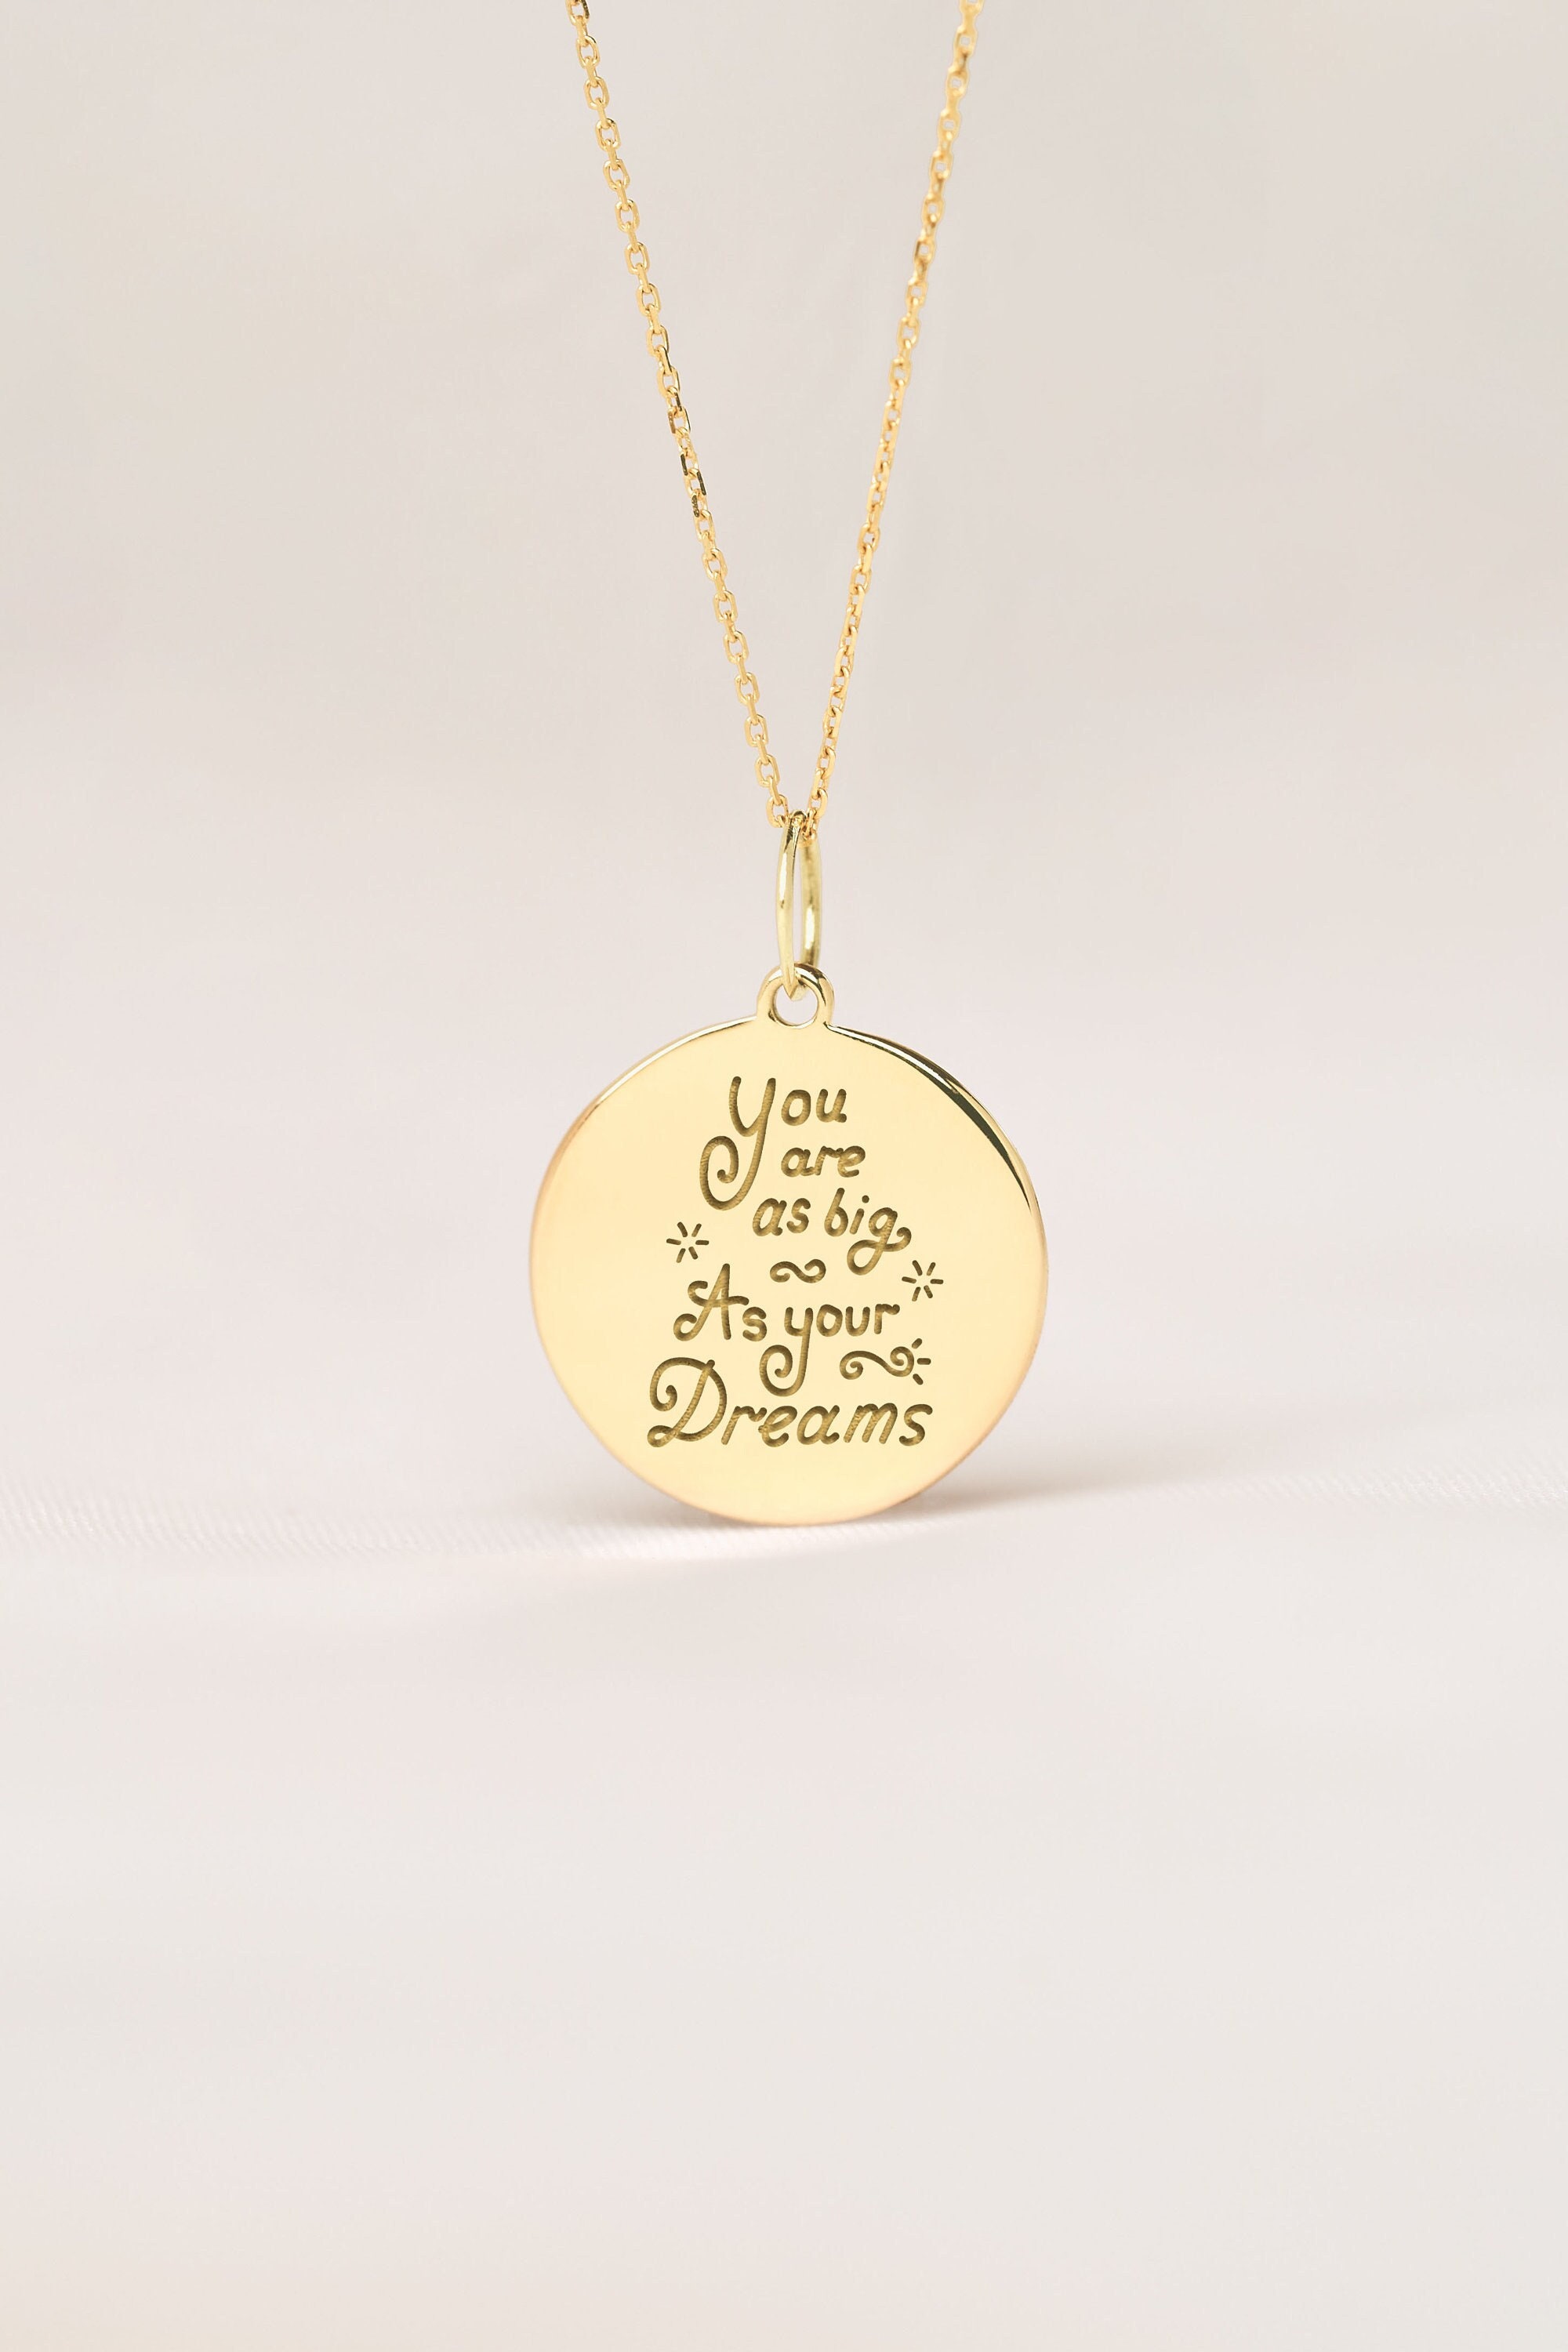 Bastardes Luggage Tag Quote Necklace 14kt Gold Vermeil